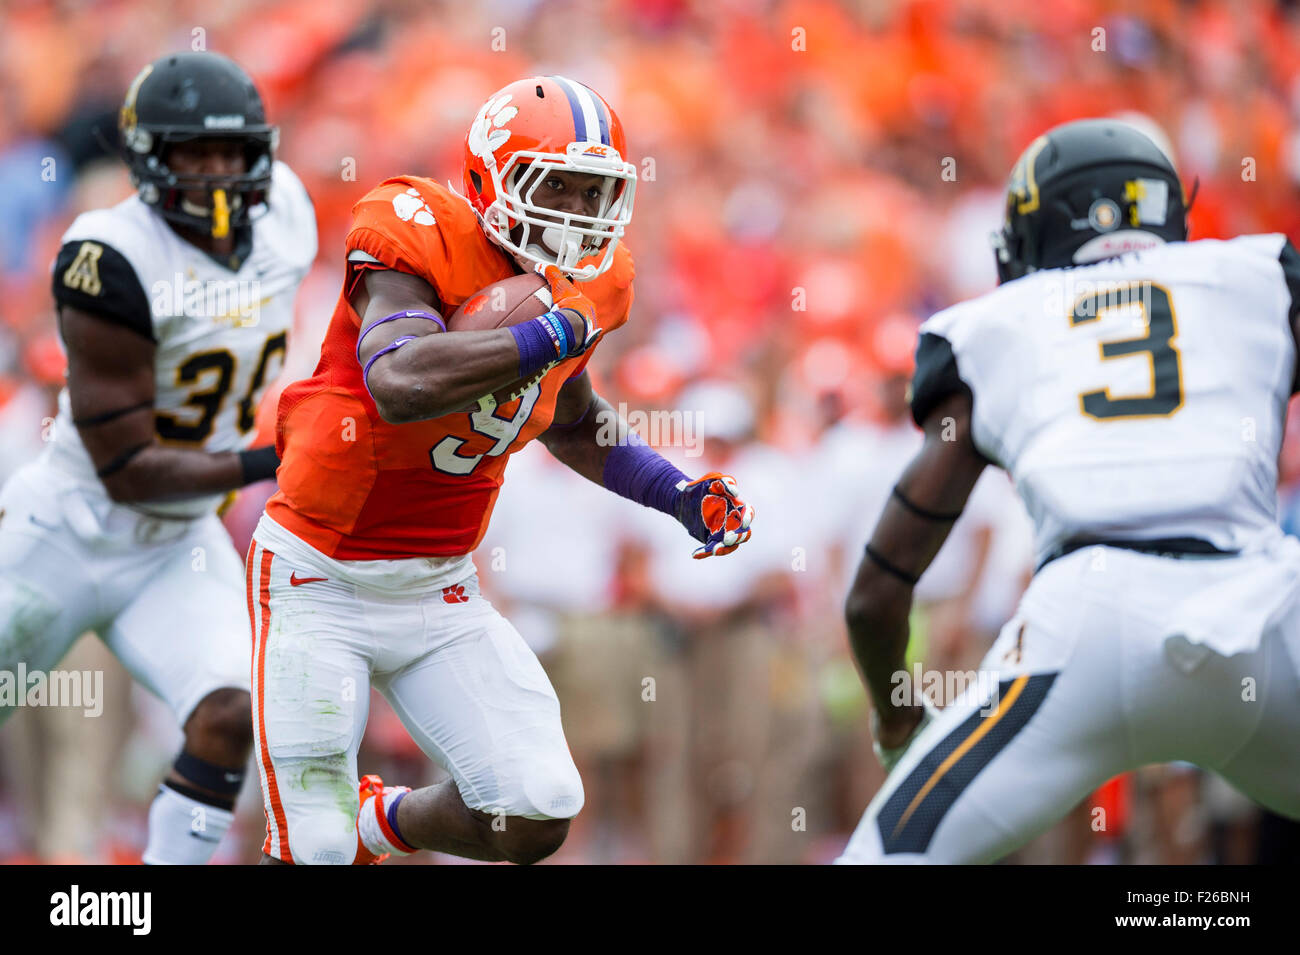 Clemson running back Wayne Gallman (9) runs over App State defensive back Alex Gray (3) to score a touchdown during the NCAA college football game between Clemson and Appalachian State on Saturday Sep. 12, 2015 at Memorial Stadium, in Clemson, S.C. Jacob Kupferman/CSM Stock Photo